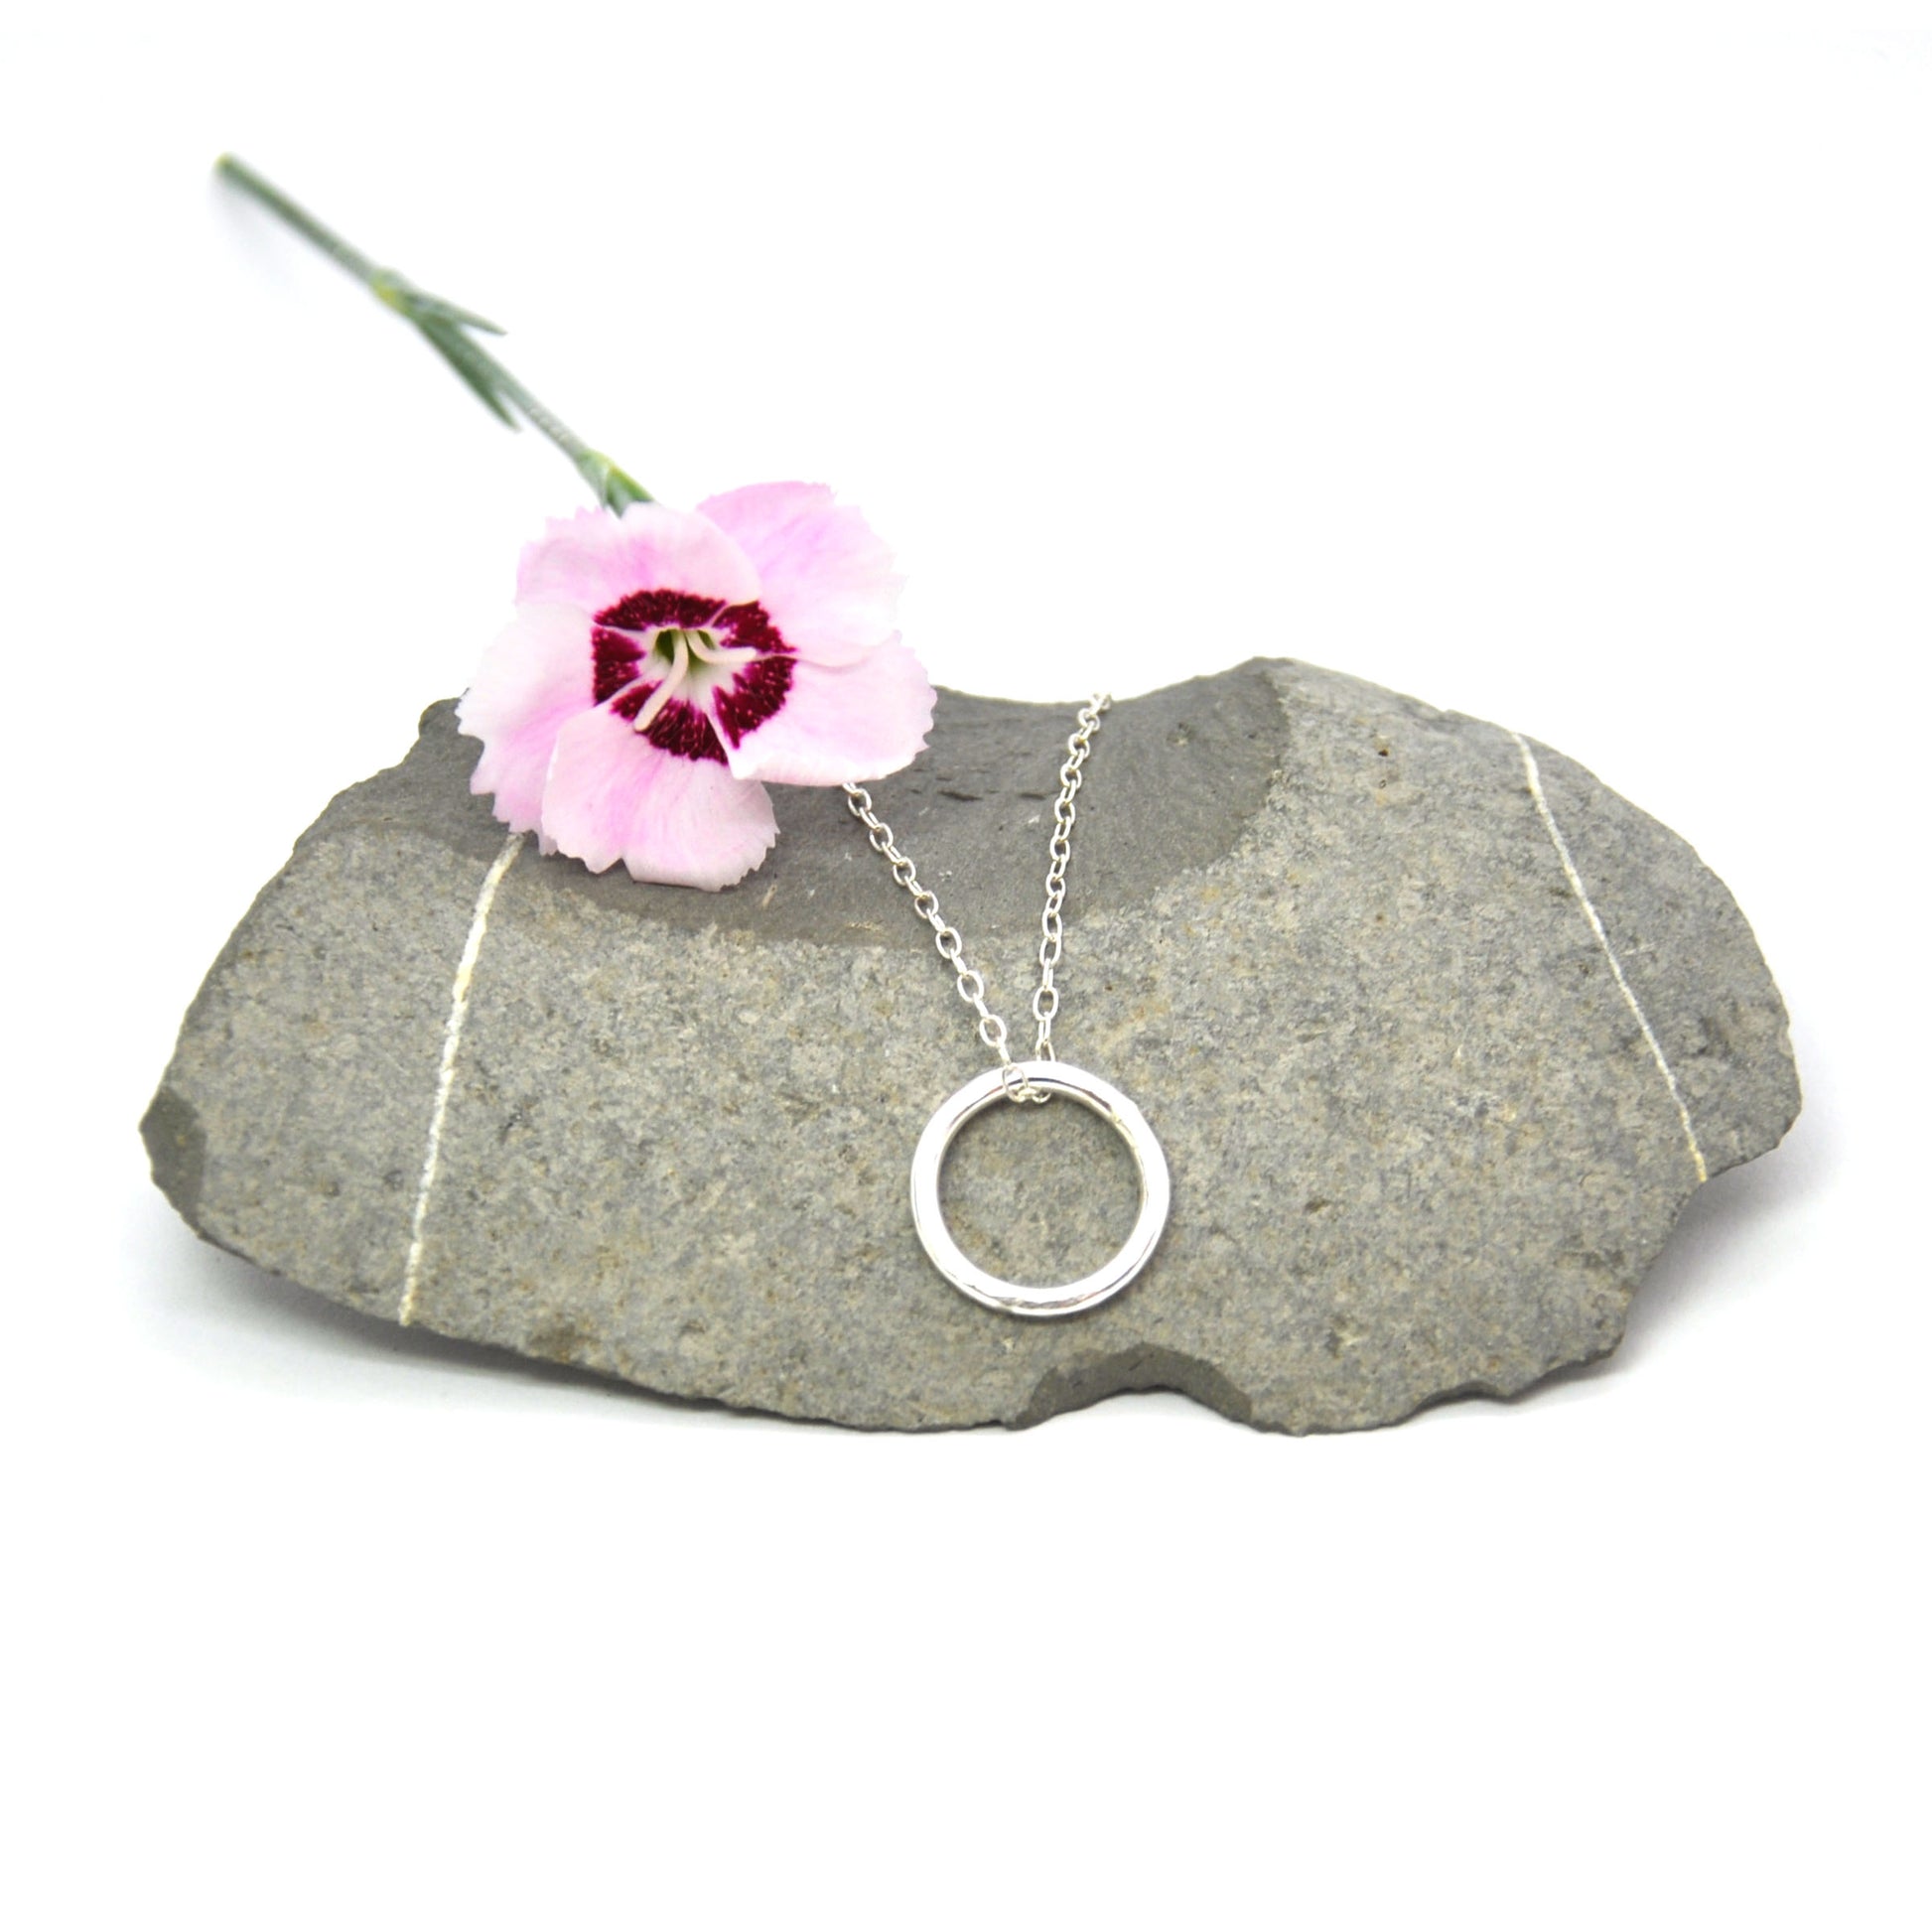 Silver hammered open circle pendant on silver chain - small on pebble with flower